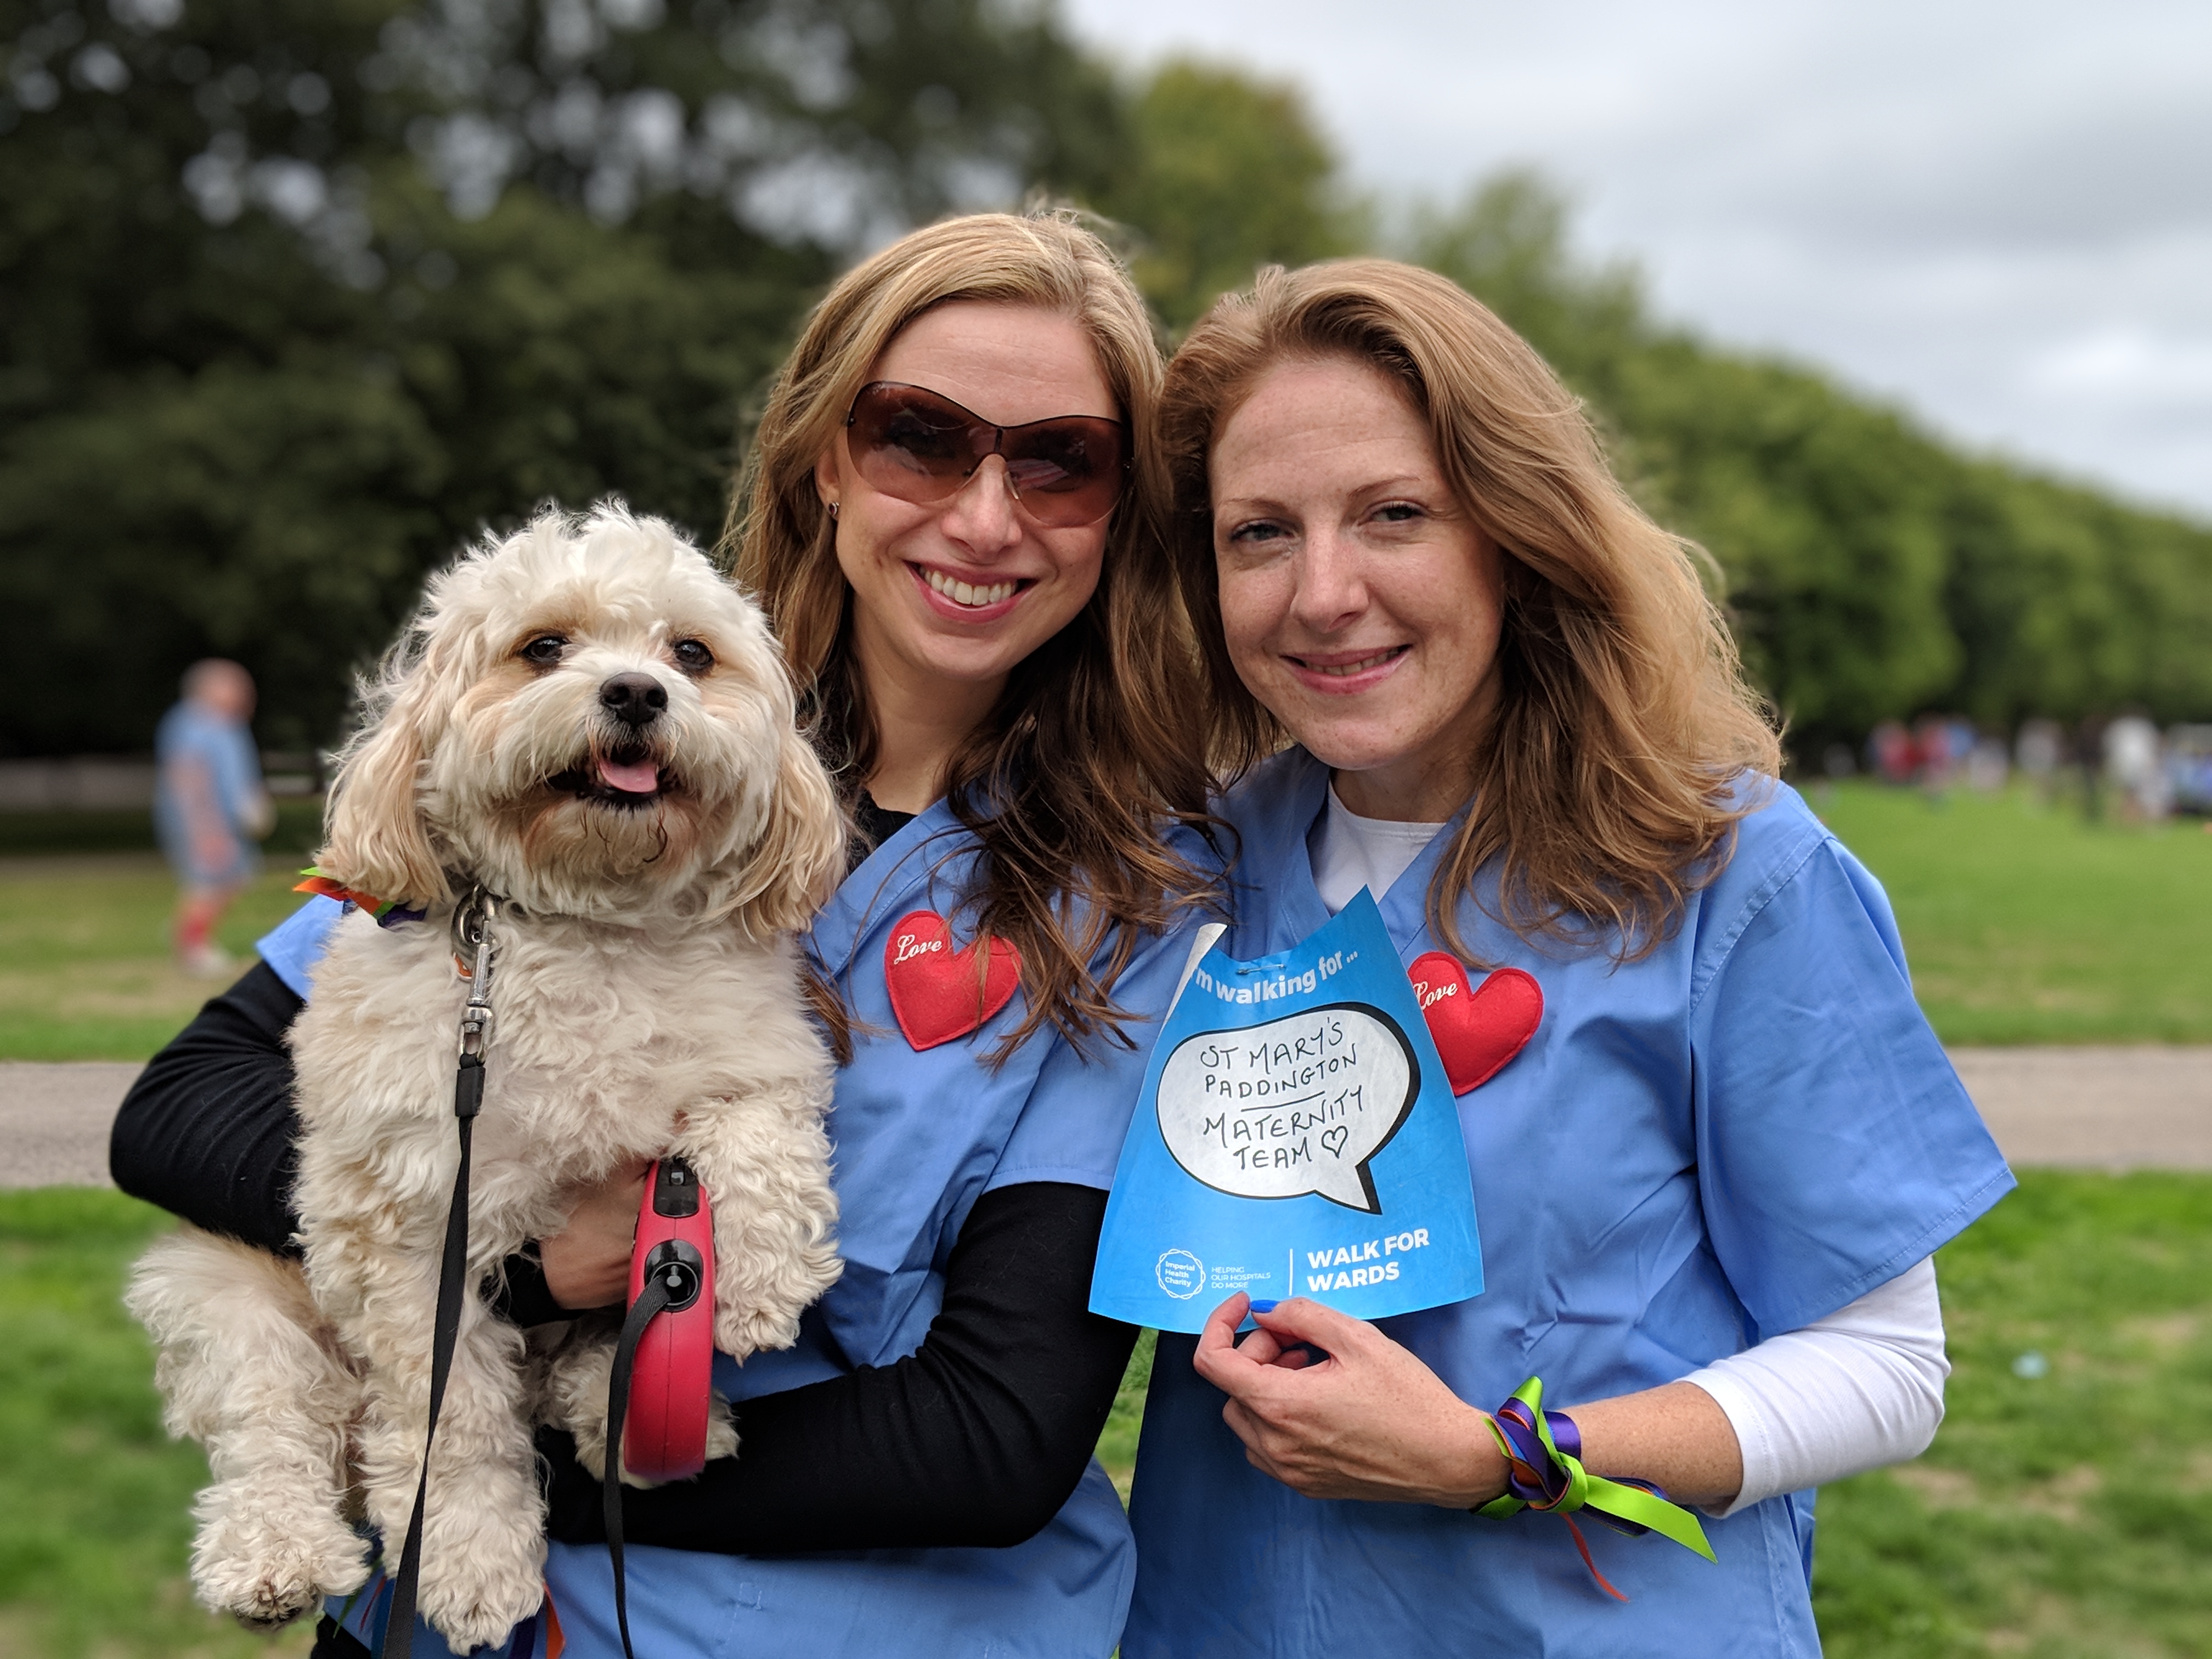 Walk for Wards 2019